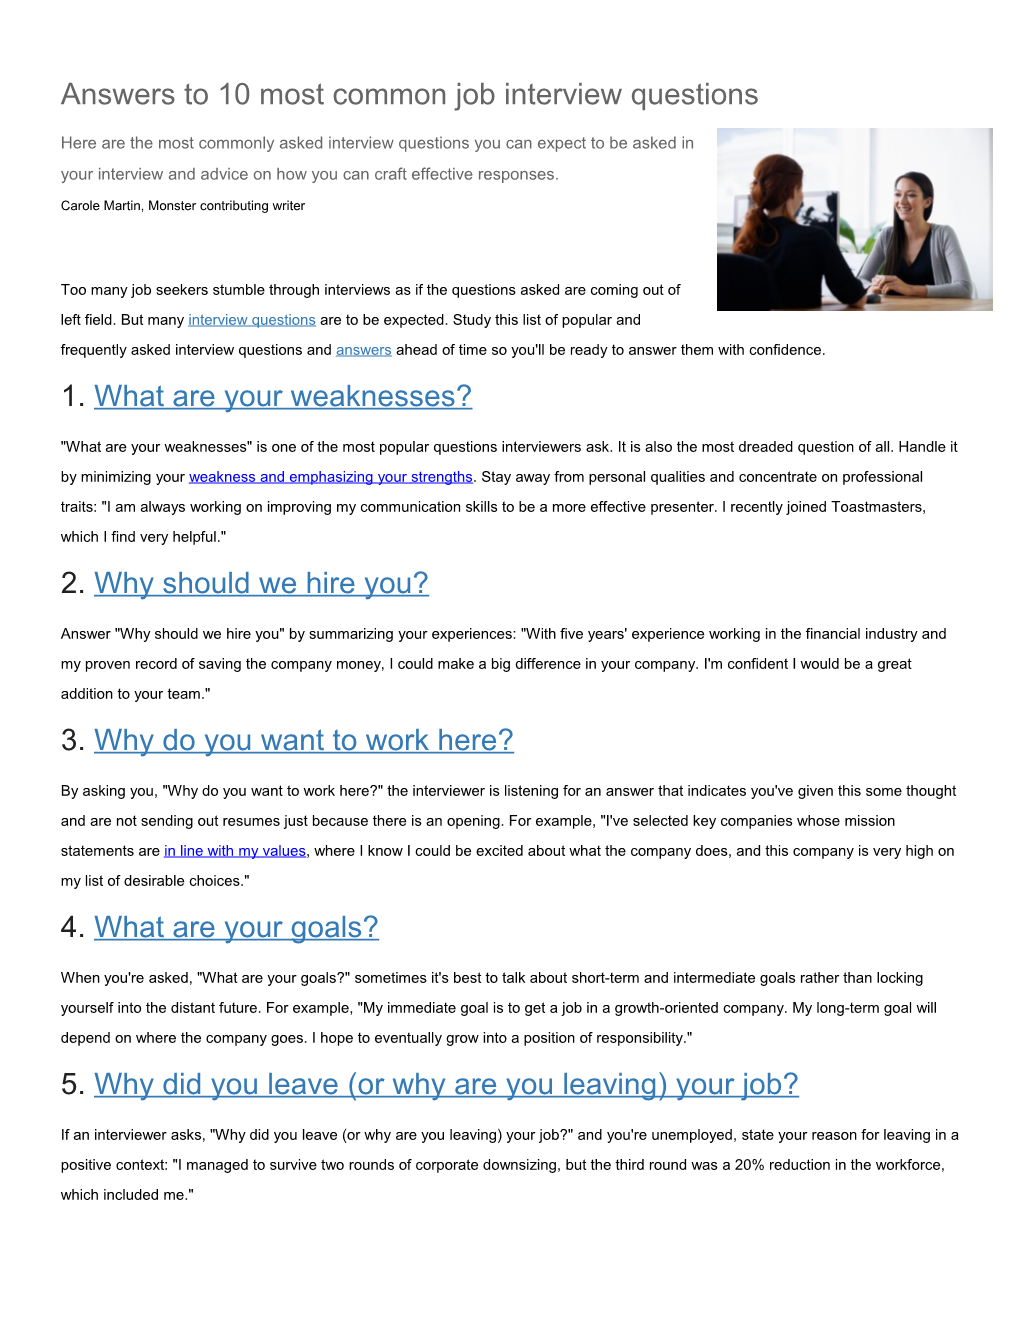 Answers to 10 Most Common Job Interview Questions